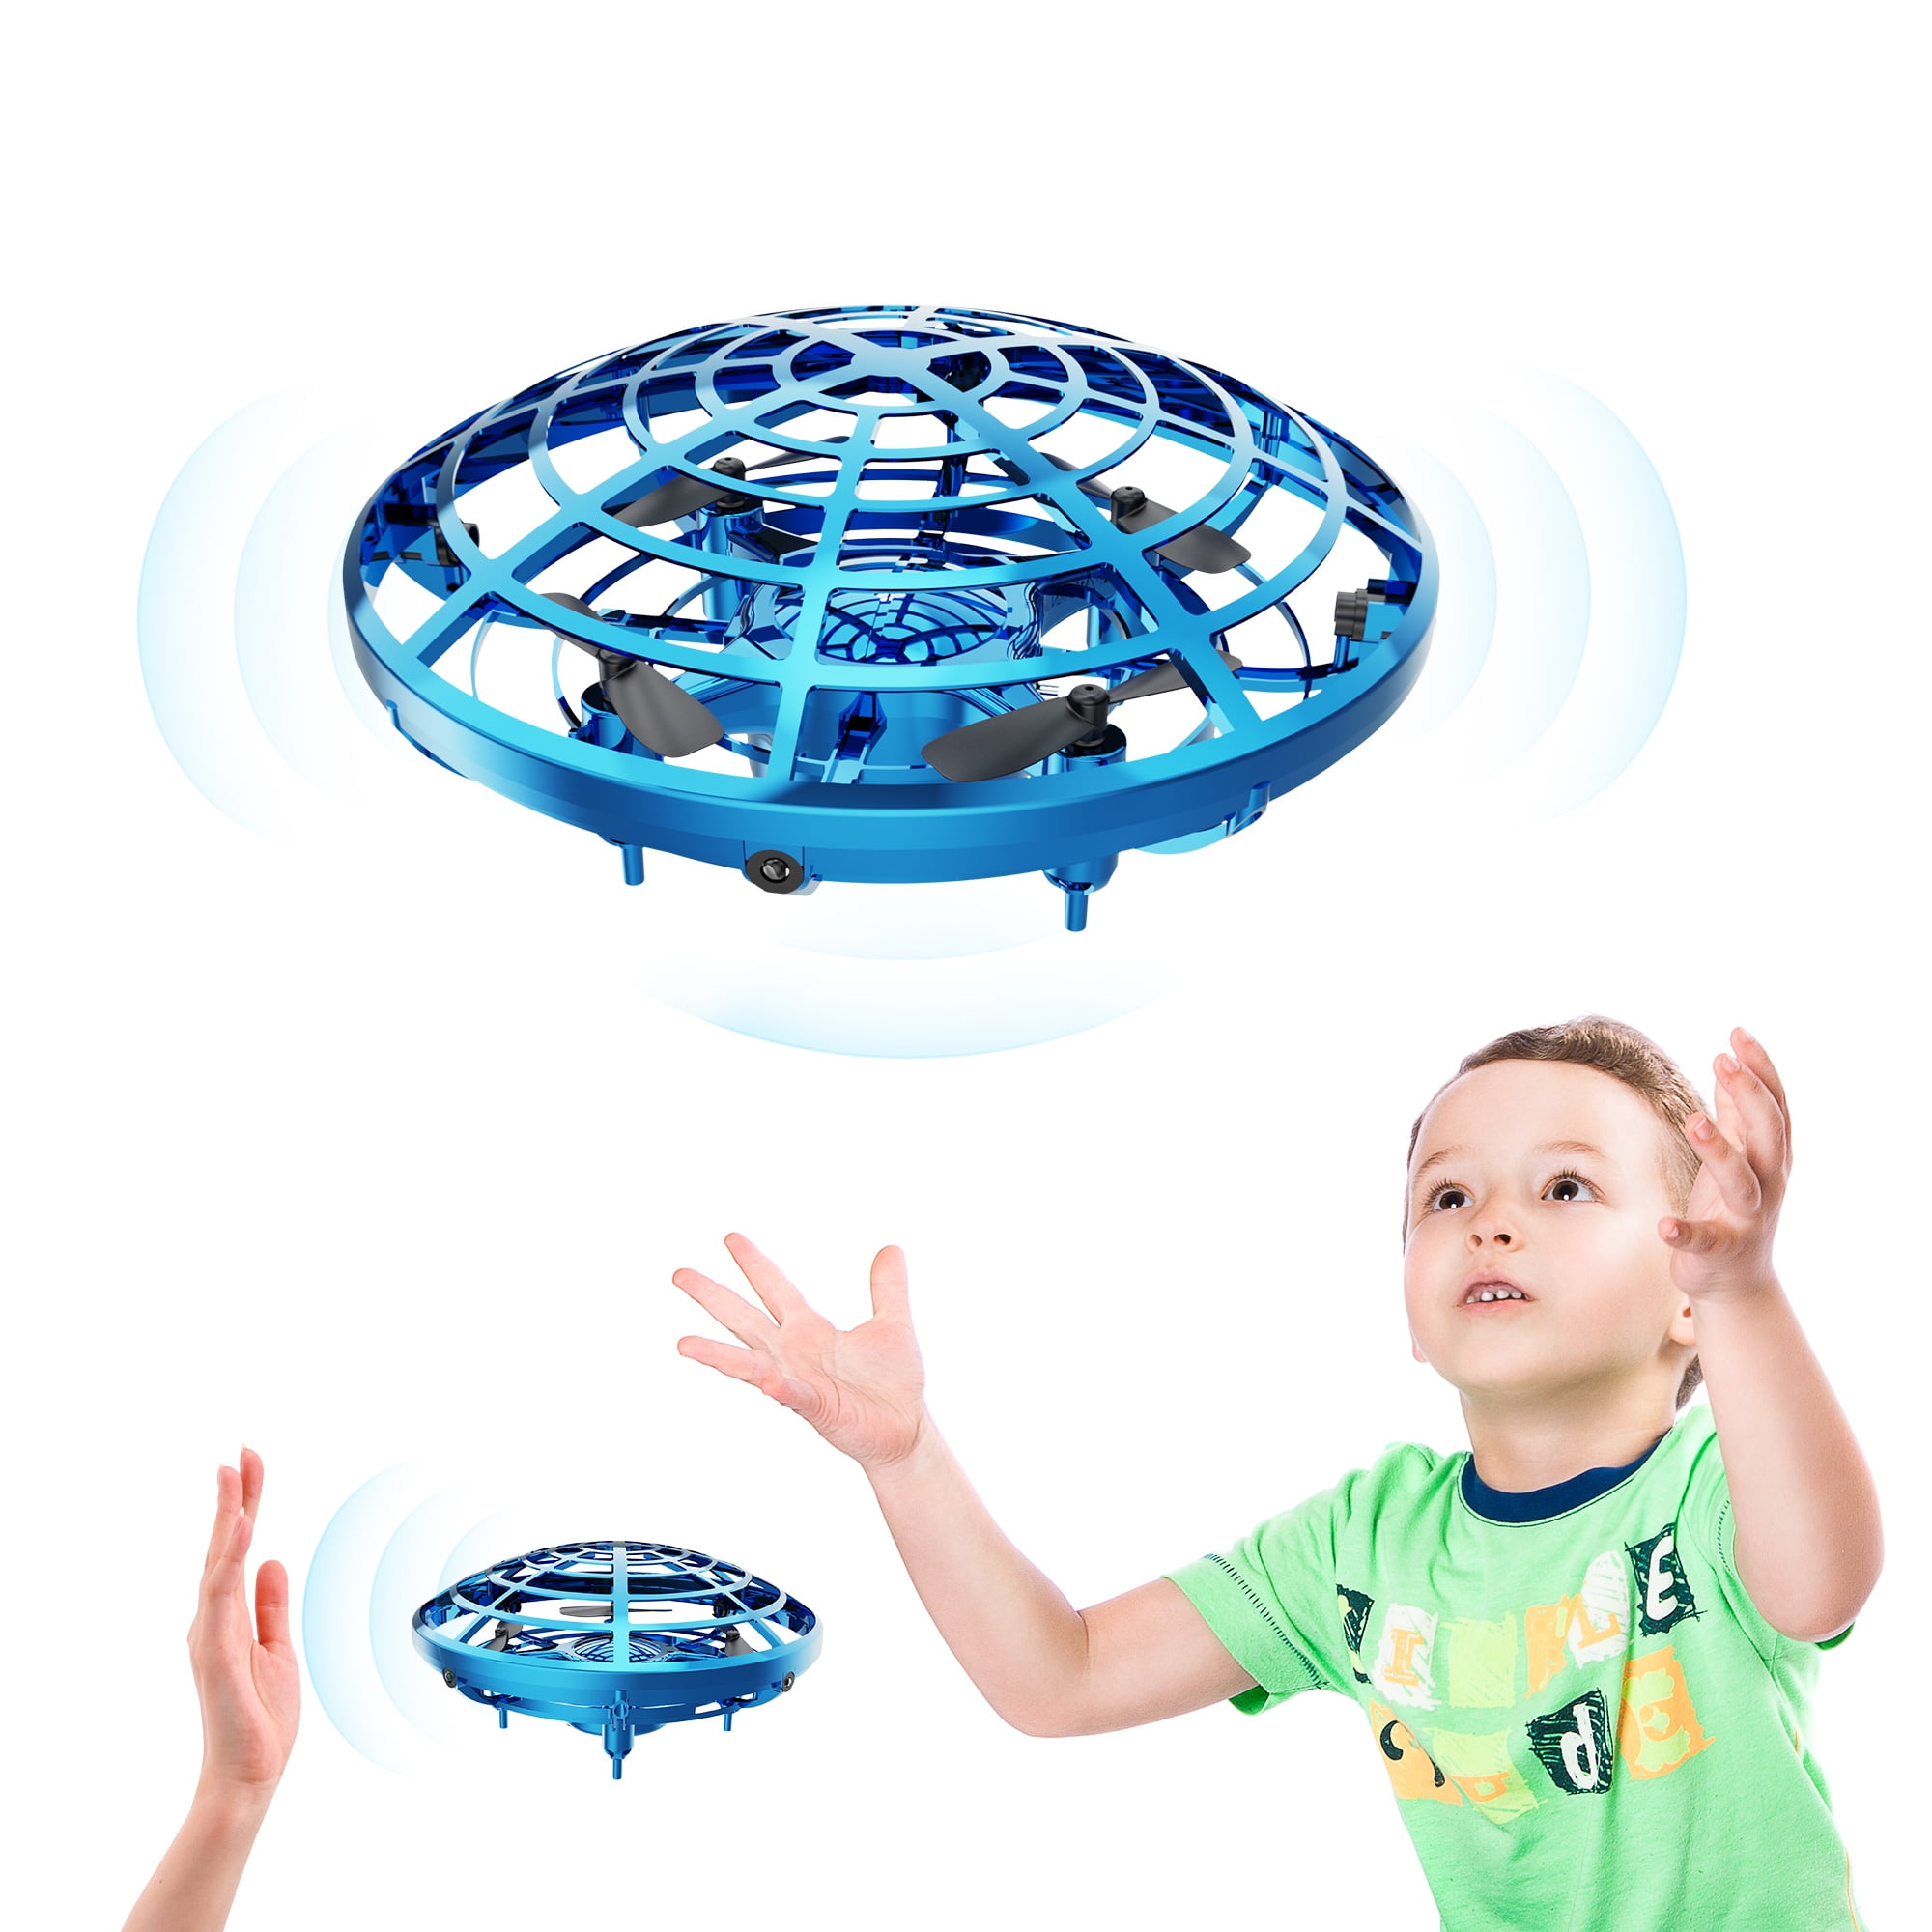 Hand Operatd Drone for Kids-Hand Controlled Mini Drones UFO Flying Toys for Boys and Girls 